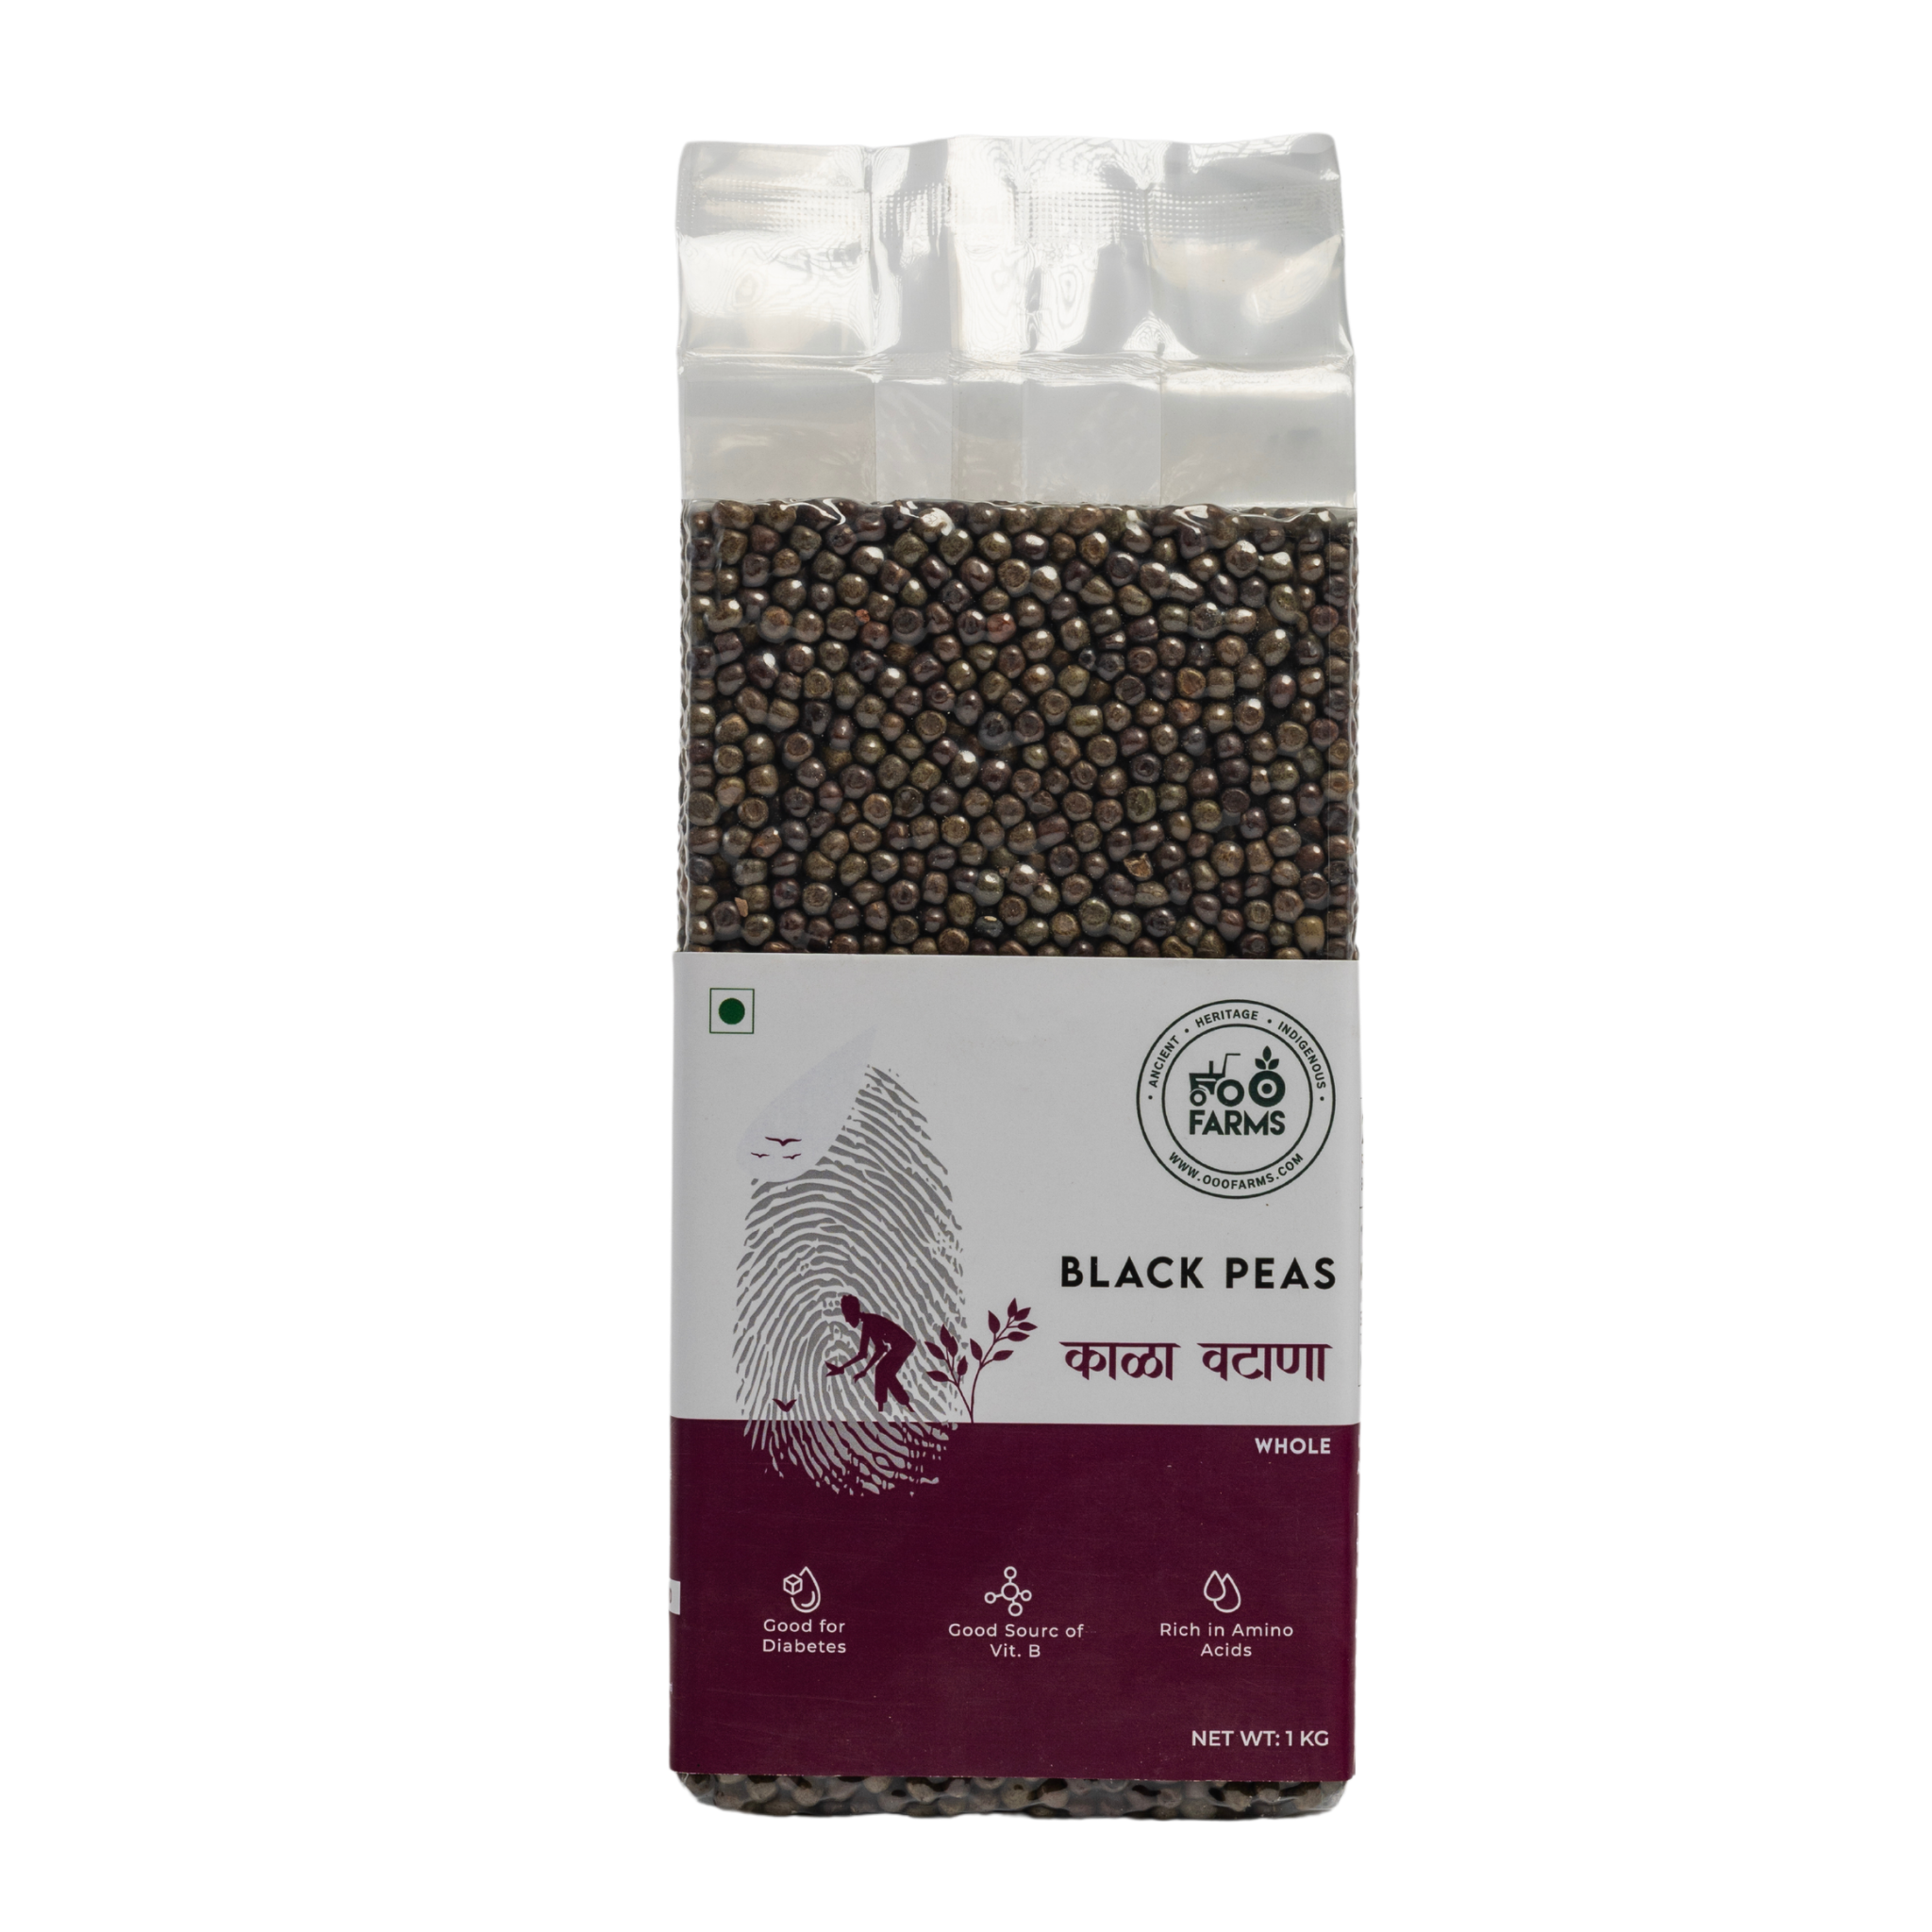 OOO Farms Whole Black Peas Package Frontside